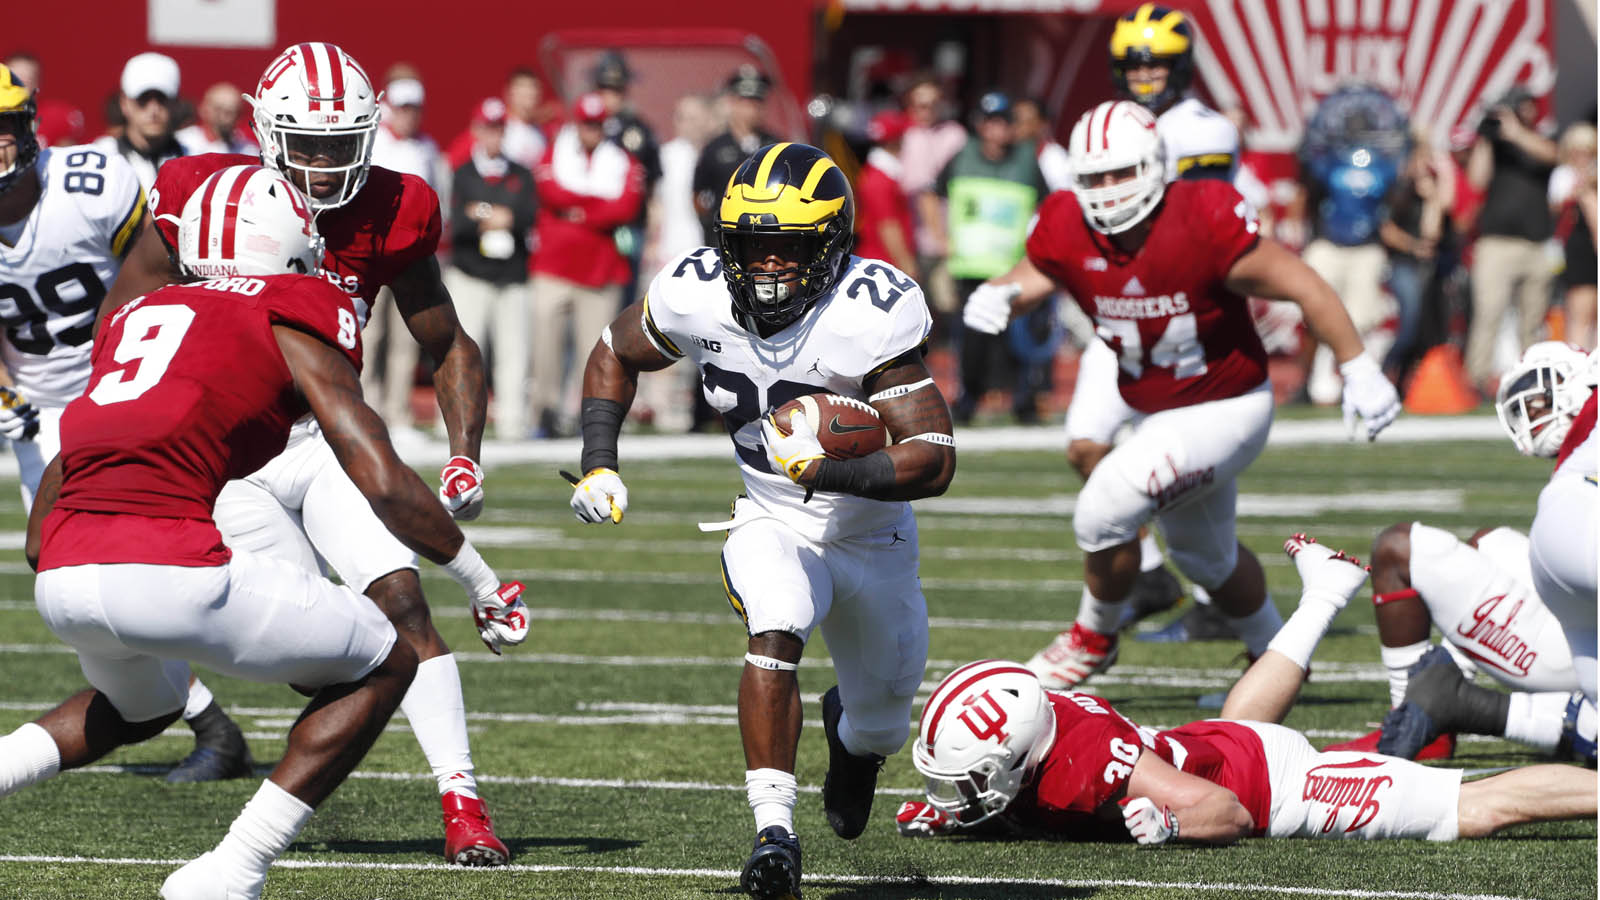 Hoosiers can't complete upset of Wolverines, fall 27-20 in overtime